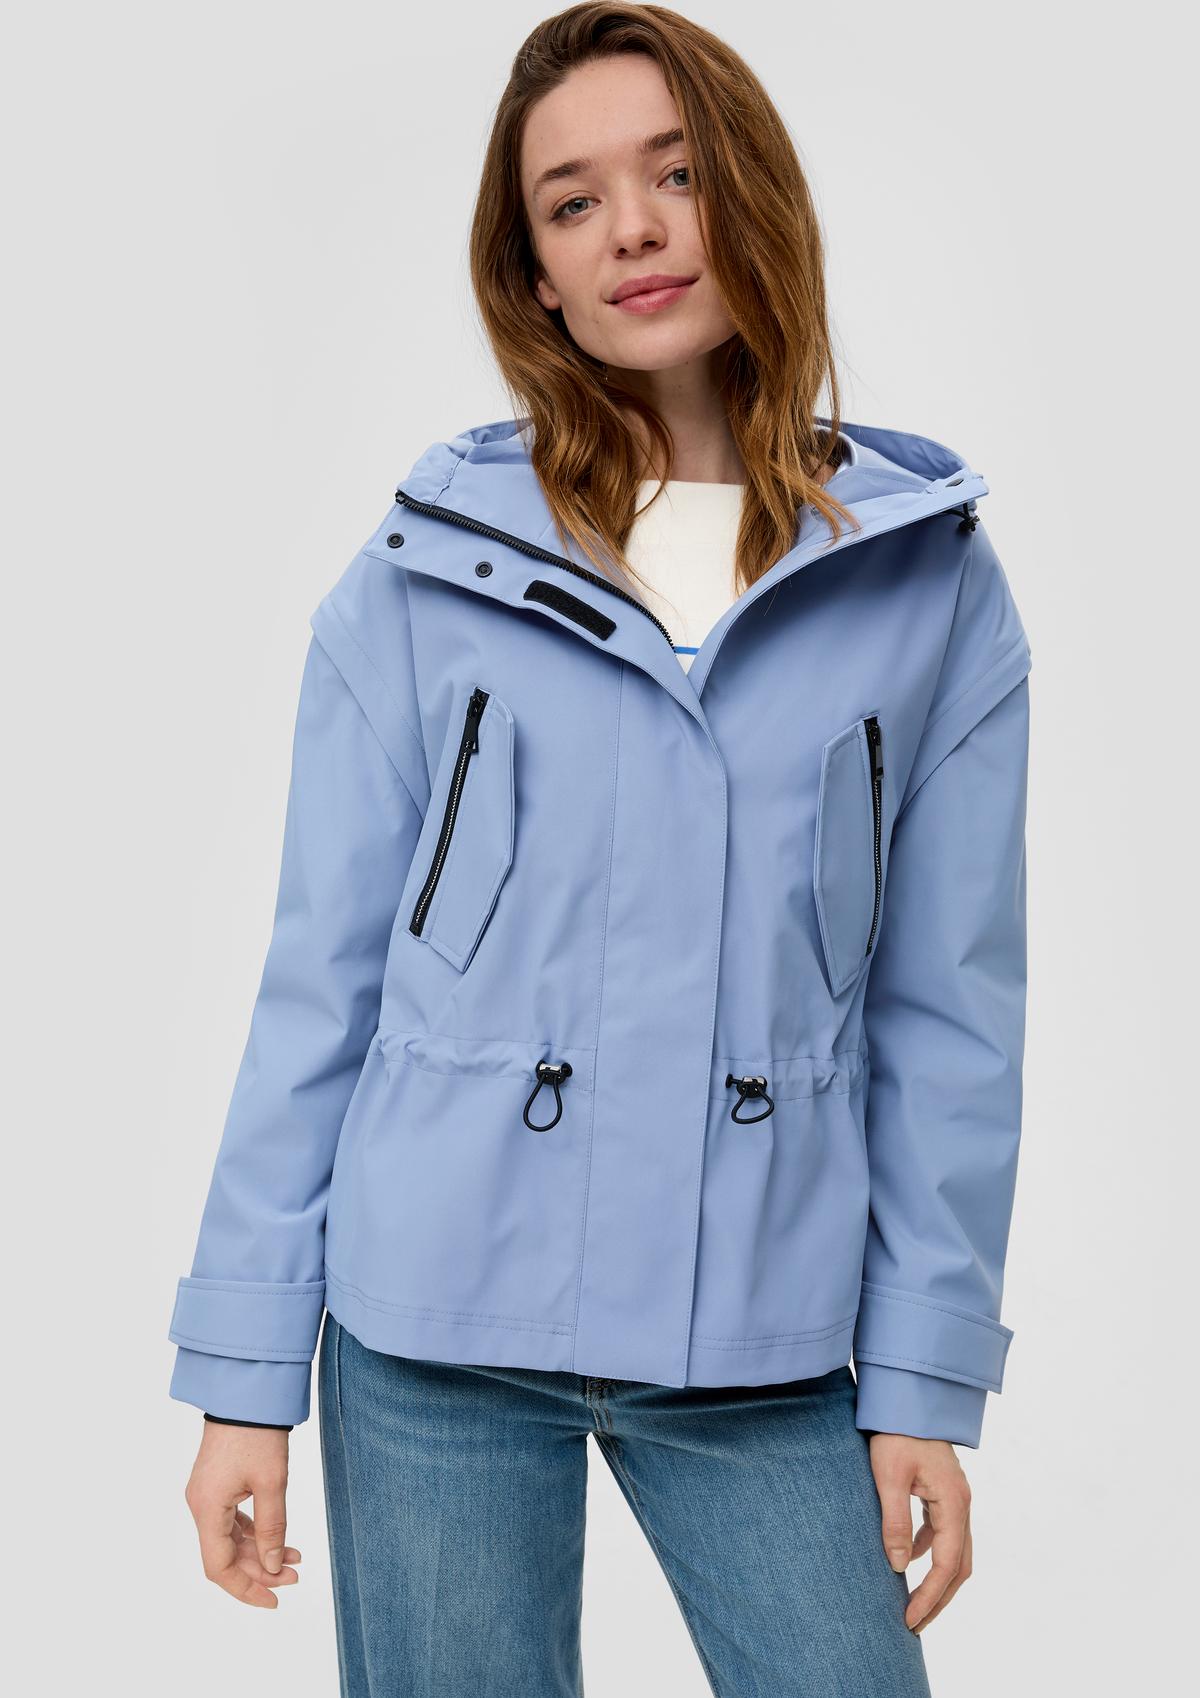 s.Oliver Outdoor jacket with removable sleeves